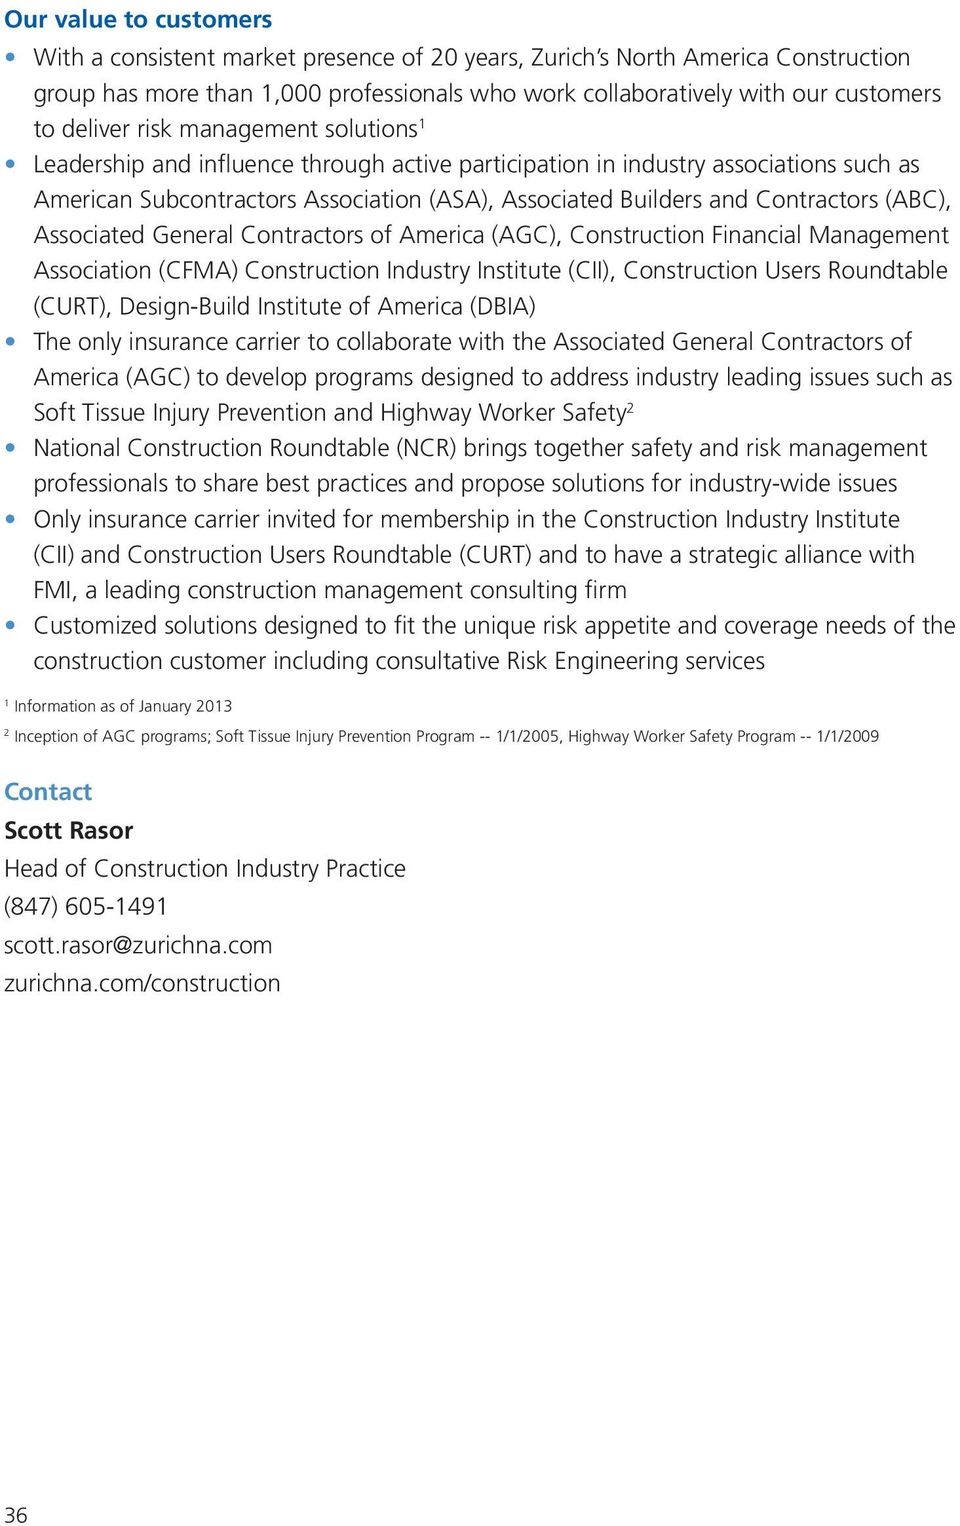 Contractors (ABC), Associated General Contractors of America (AGC), Construction Financial Management Association (CFMA) Construction Industry Institute (CII), Construction Users Roundtable (CURT),